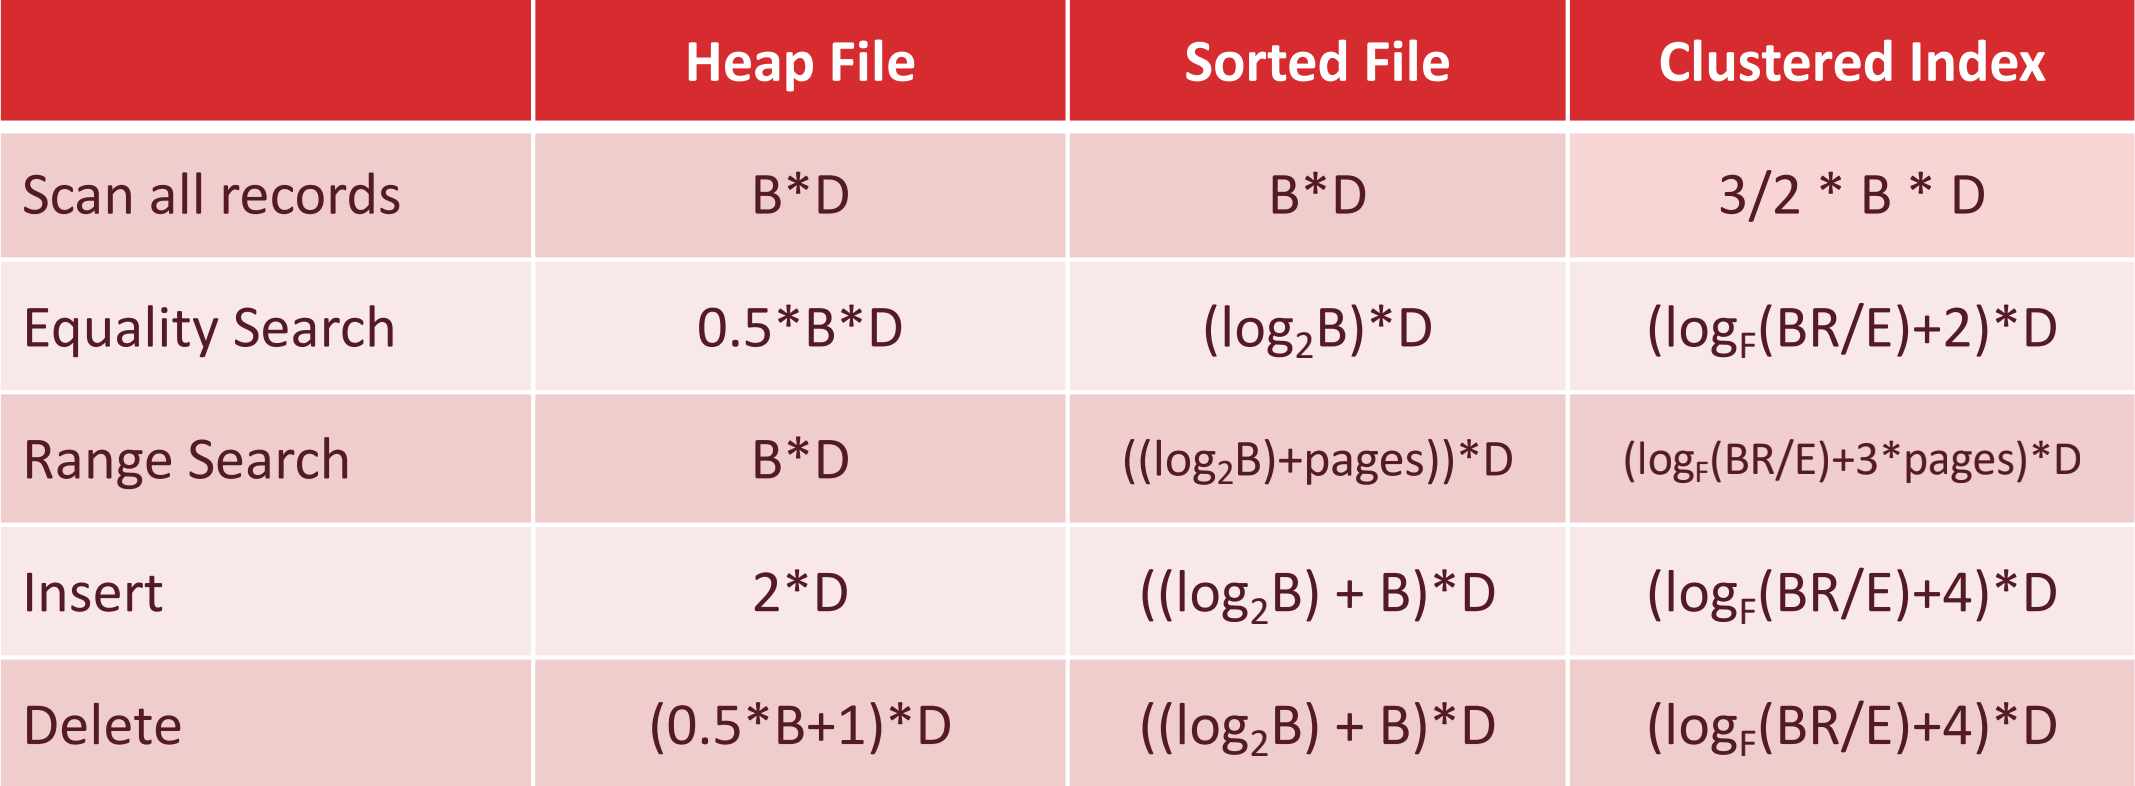 Cost Comparison of Heap, Sorted, and Indexed Files